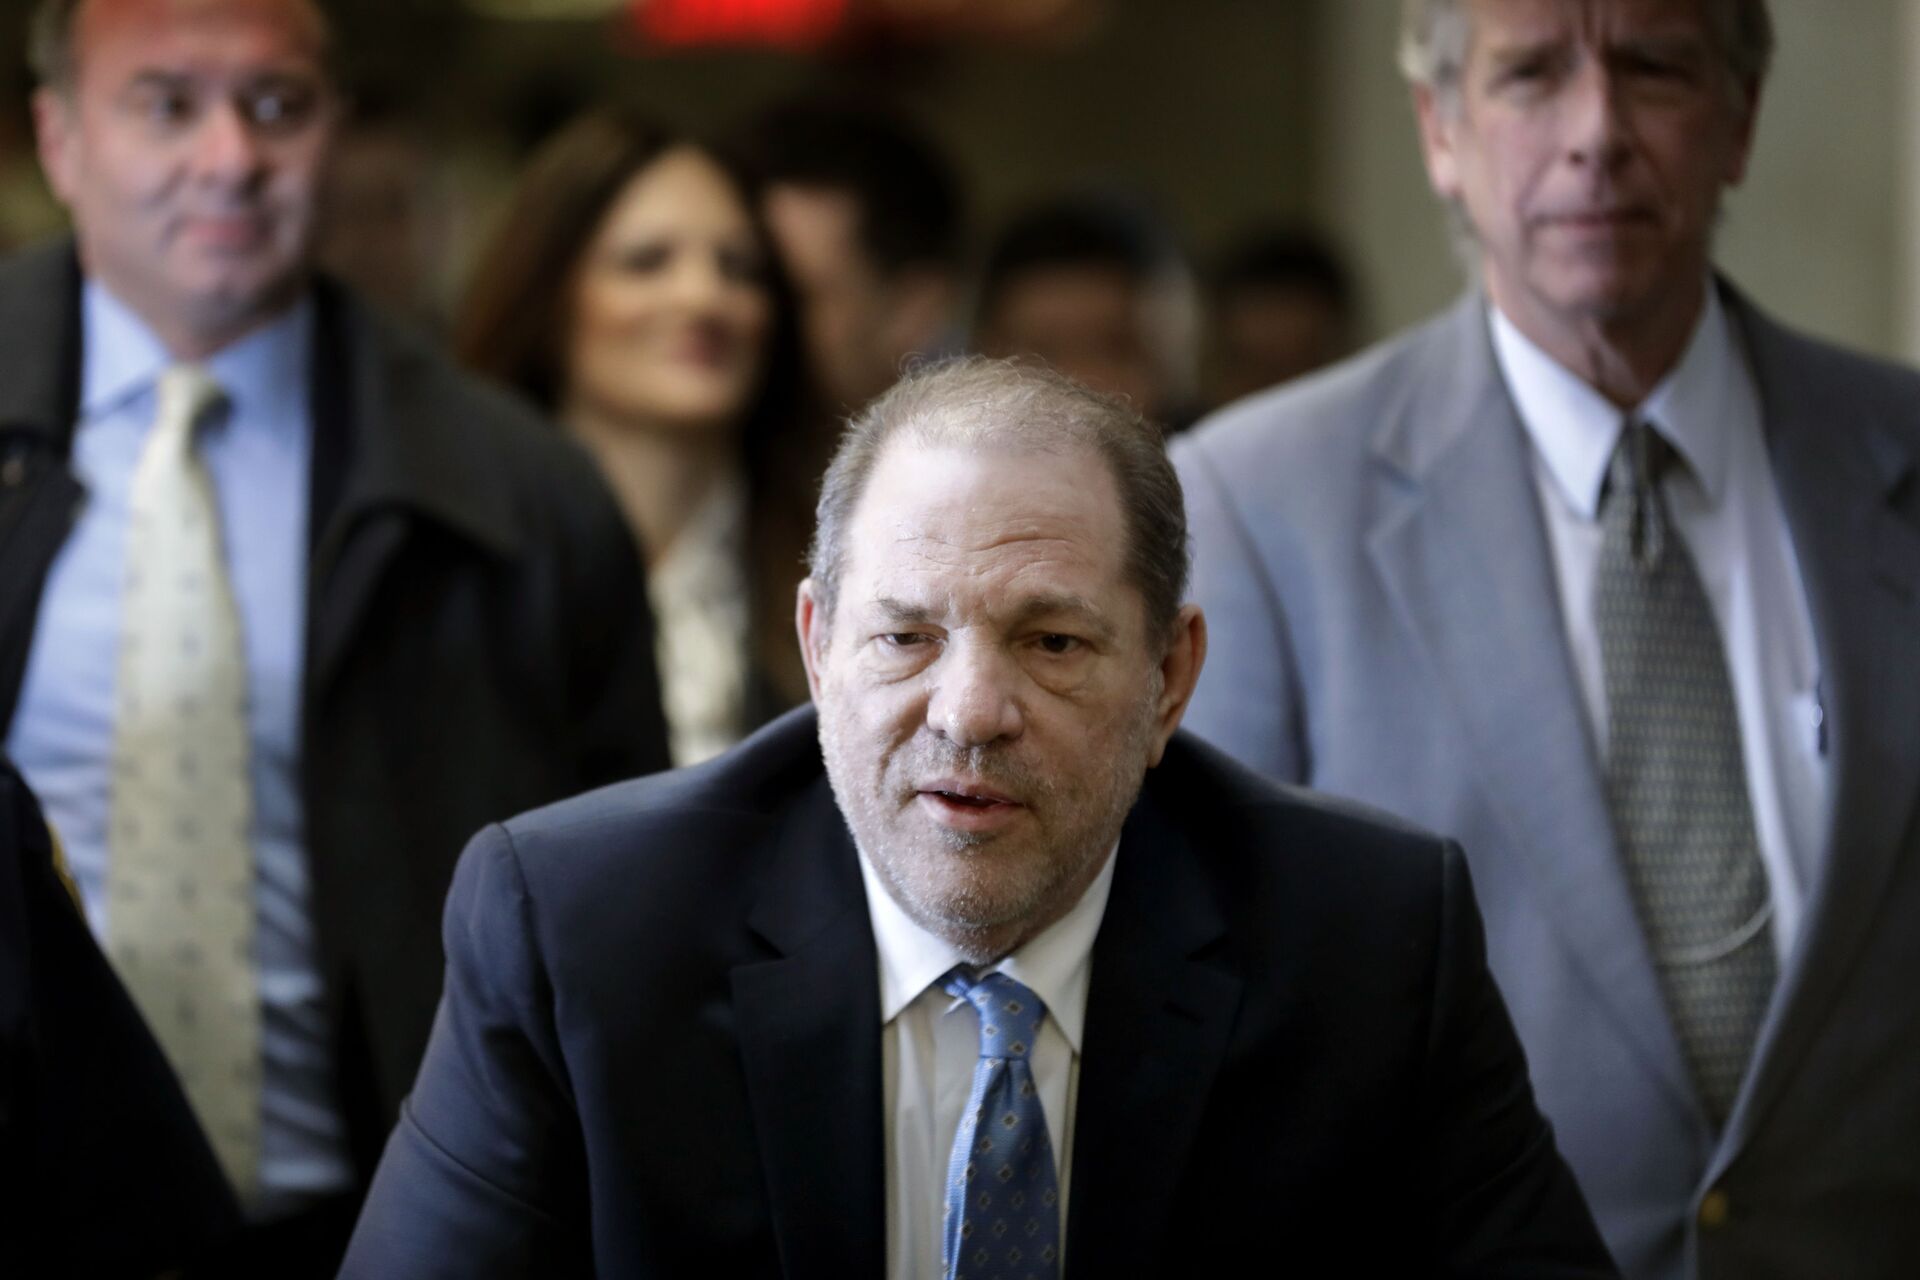 In this Feb. 24, 2020, file photo, Harvey Weinstein arrives at a Manhattan courthouse as jury deliberations continue in his rape trial in New York. The disgraced Hollywood film mogul and convicted rapist is asking a bankruptcy judge in Delaware to allow him to pursue arbitration in New York over what he claims is his wrongful termination from the company he co-founded. - Sputnik International, 1920, 28.09.2021